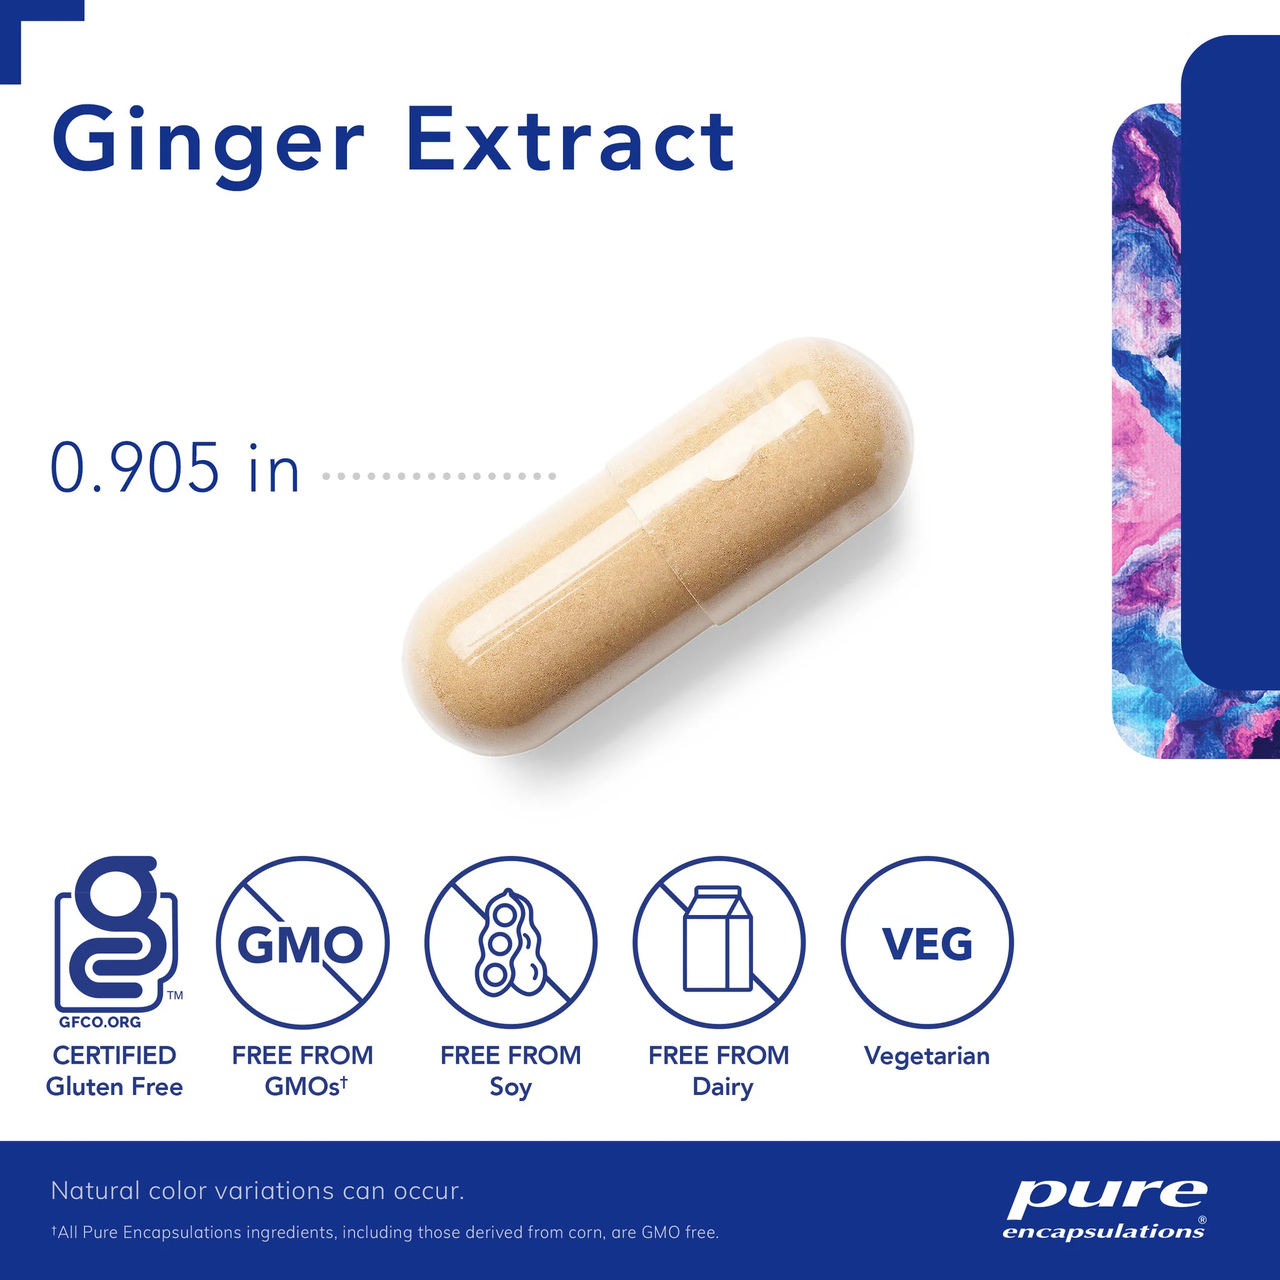 Ginger Extract - Pure Encapsulations